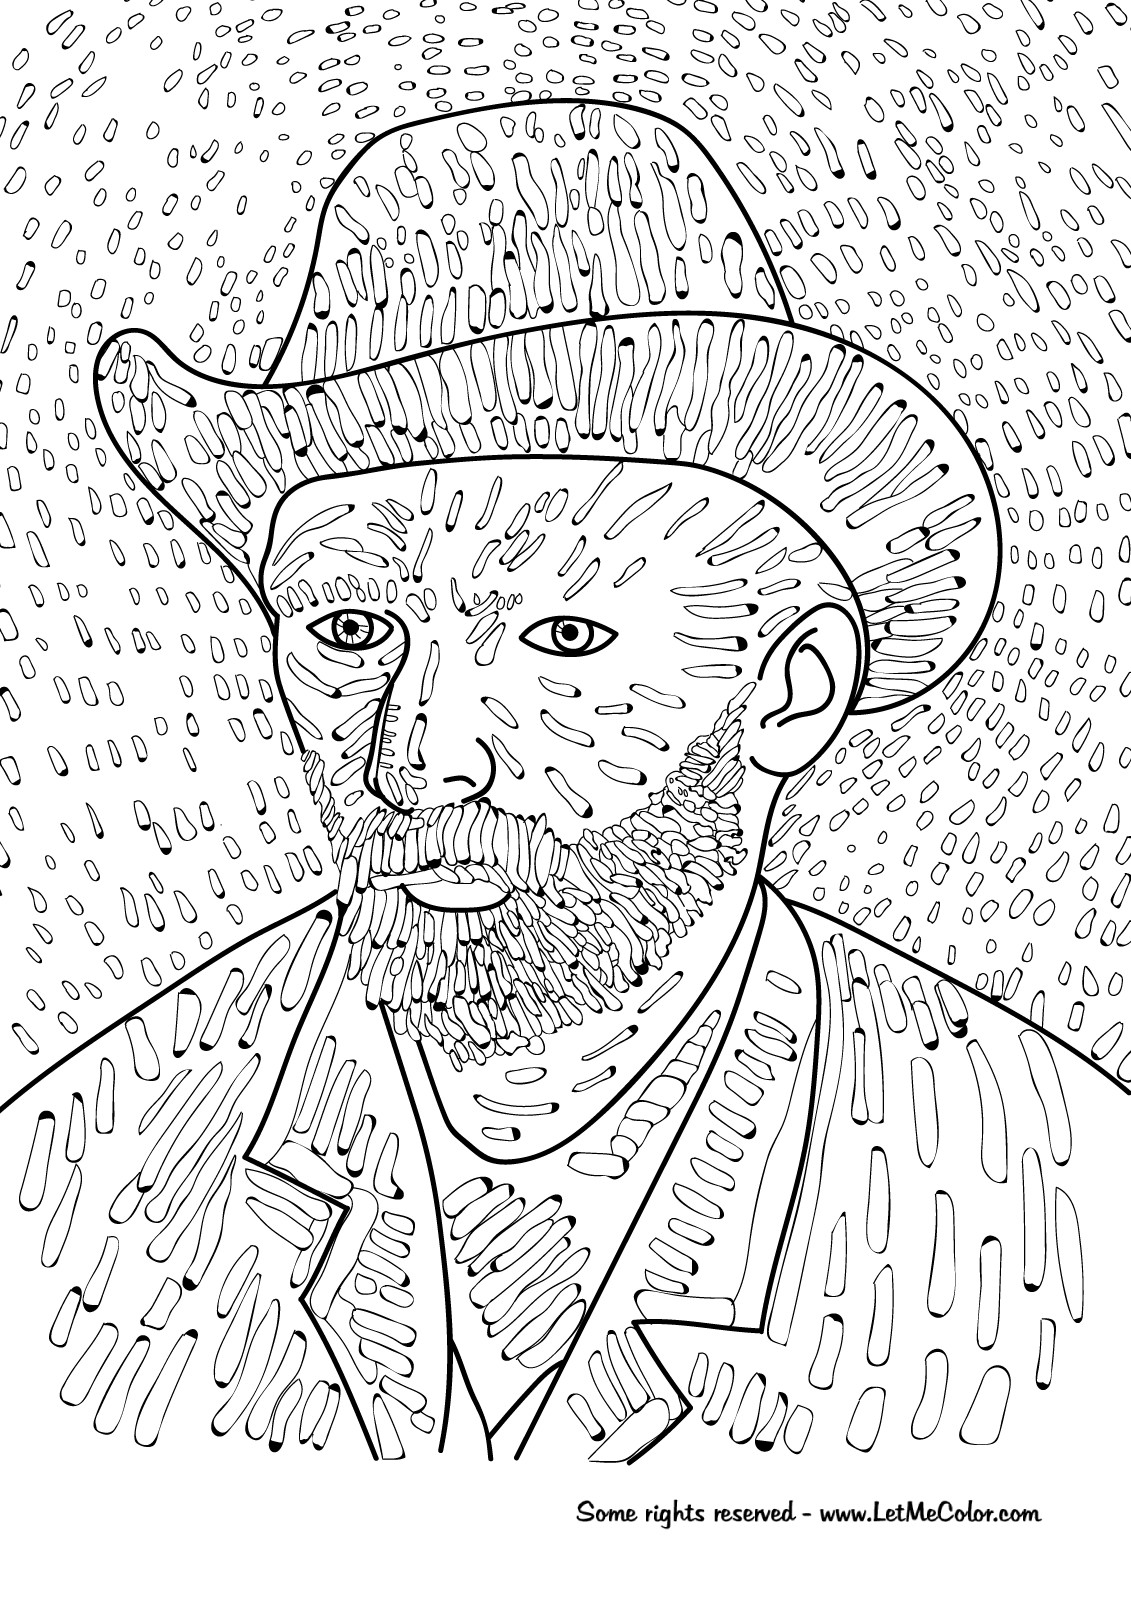 Van Gogh Coloring Pages
 LetMeColor – Free & printable coloring pages made by Dutch